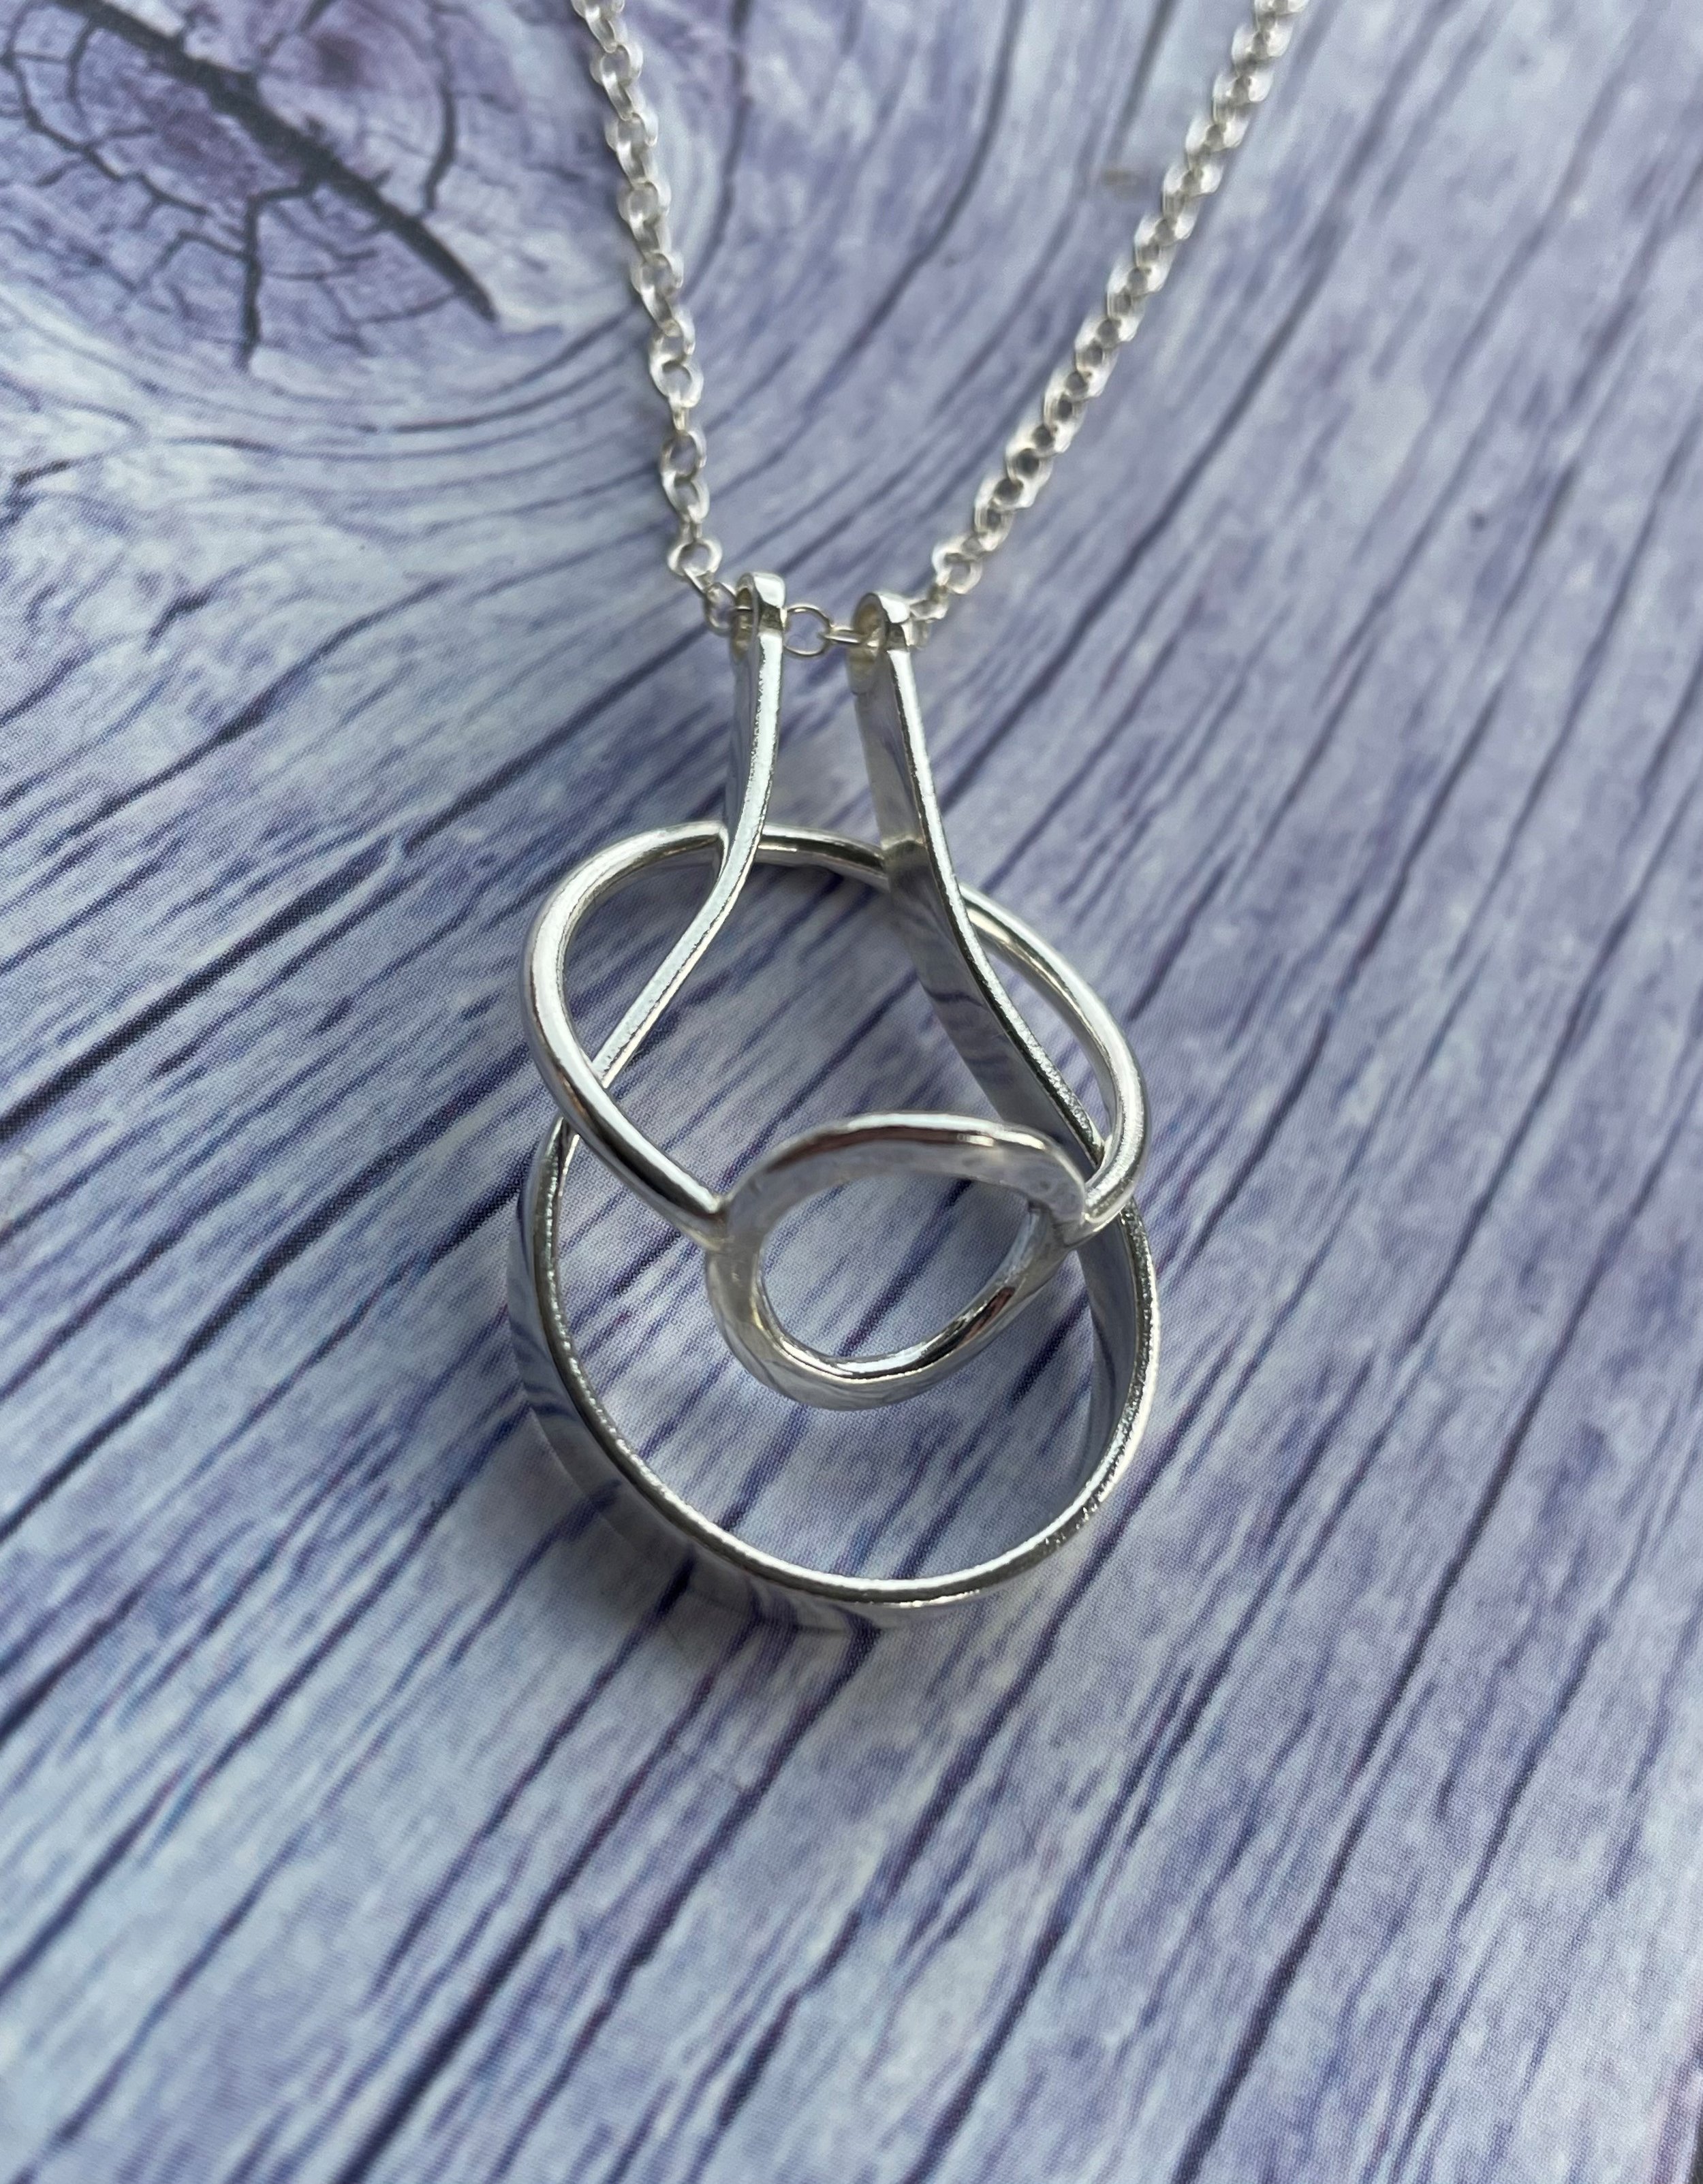 Art Deco Inspired Magic Ring Holder Necklace - YouTube